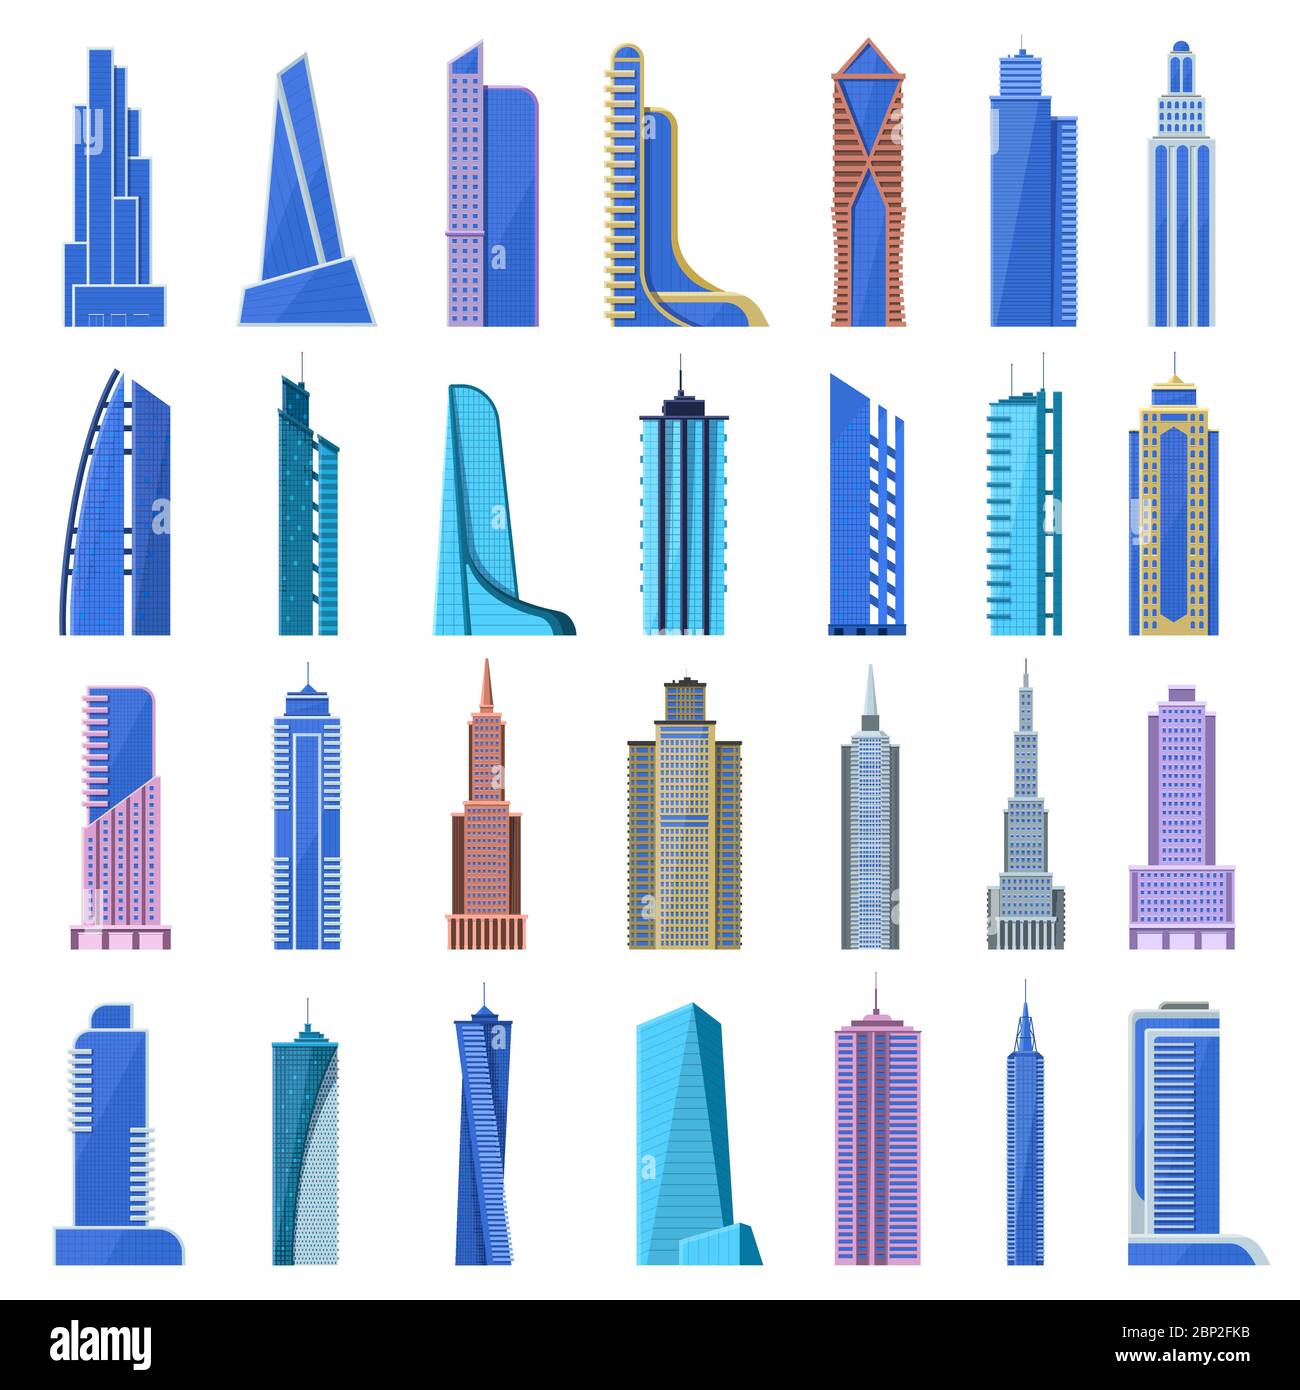 Modern skyscrapers. City office buildings, glass architecture skyscrapers. Urban cityscape tall buildings isolated vector illustration icons Stock Vector